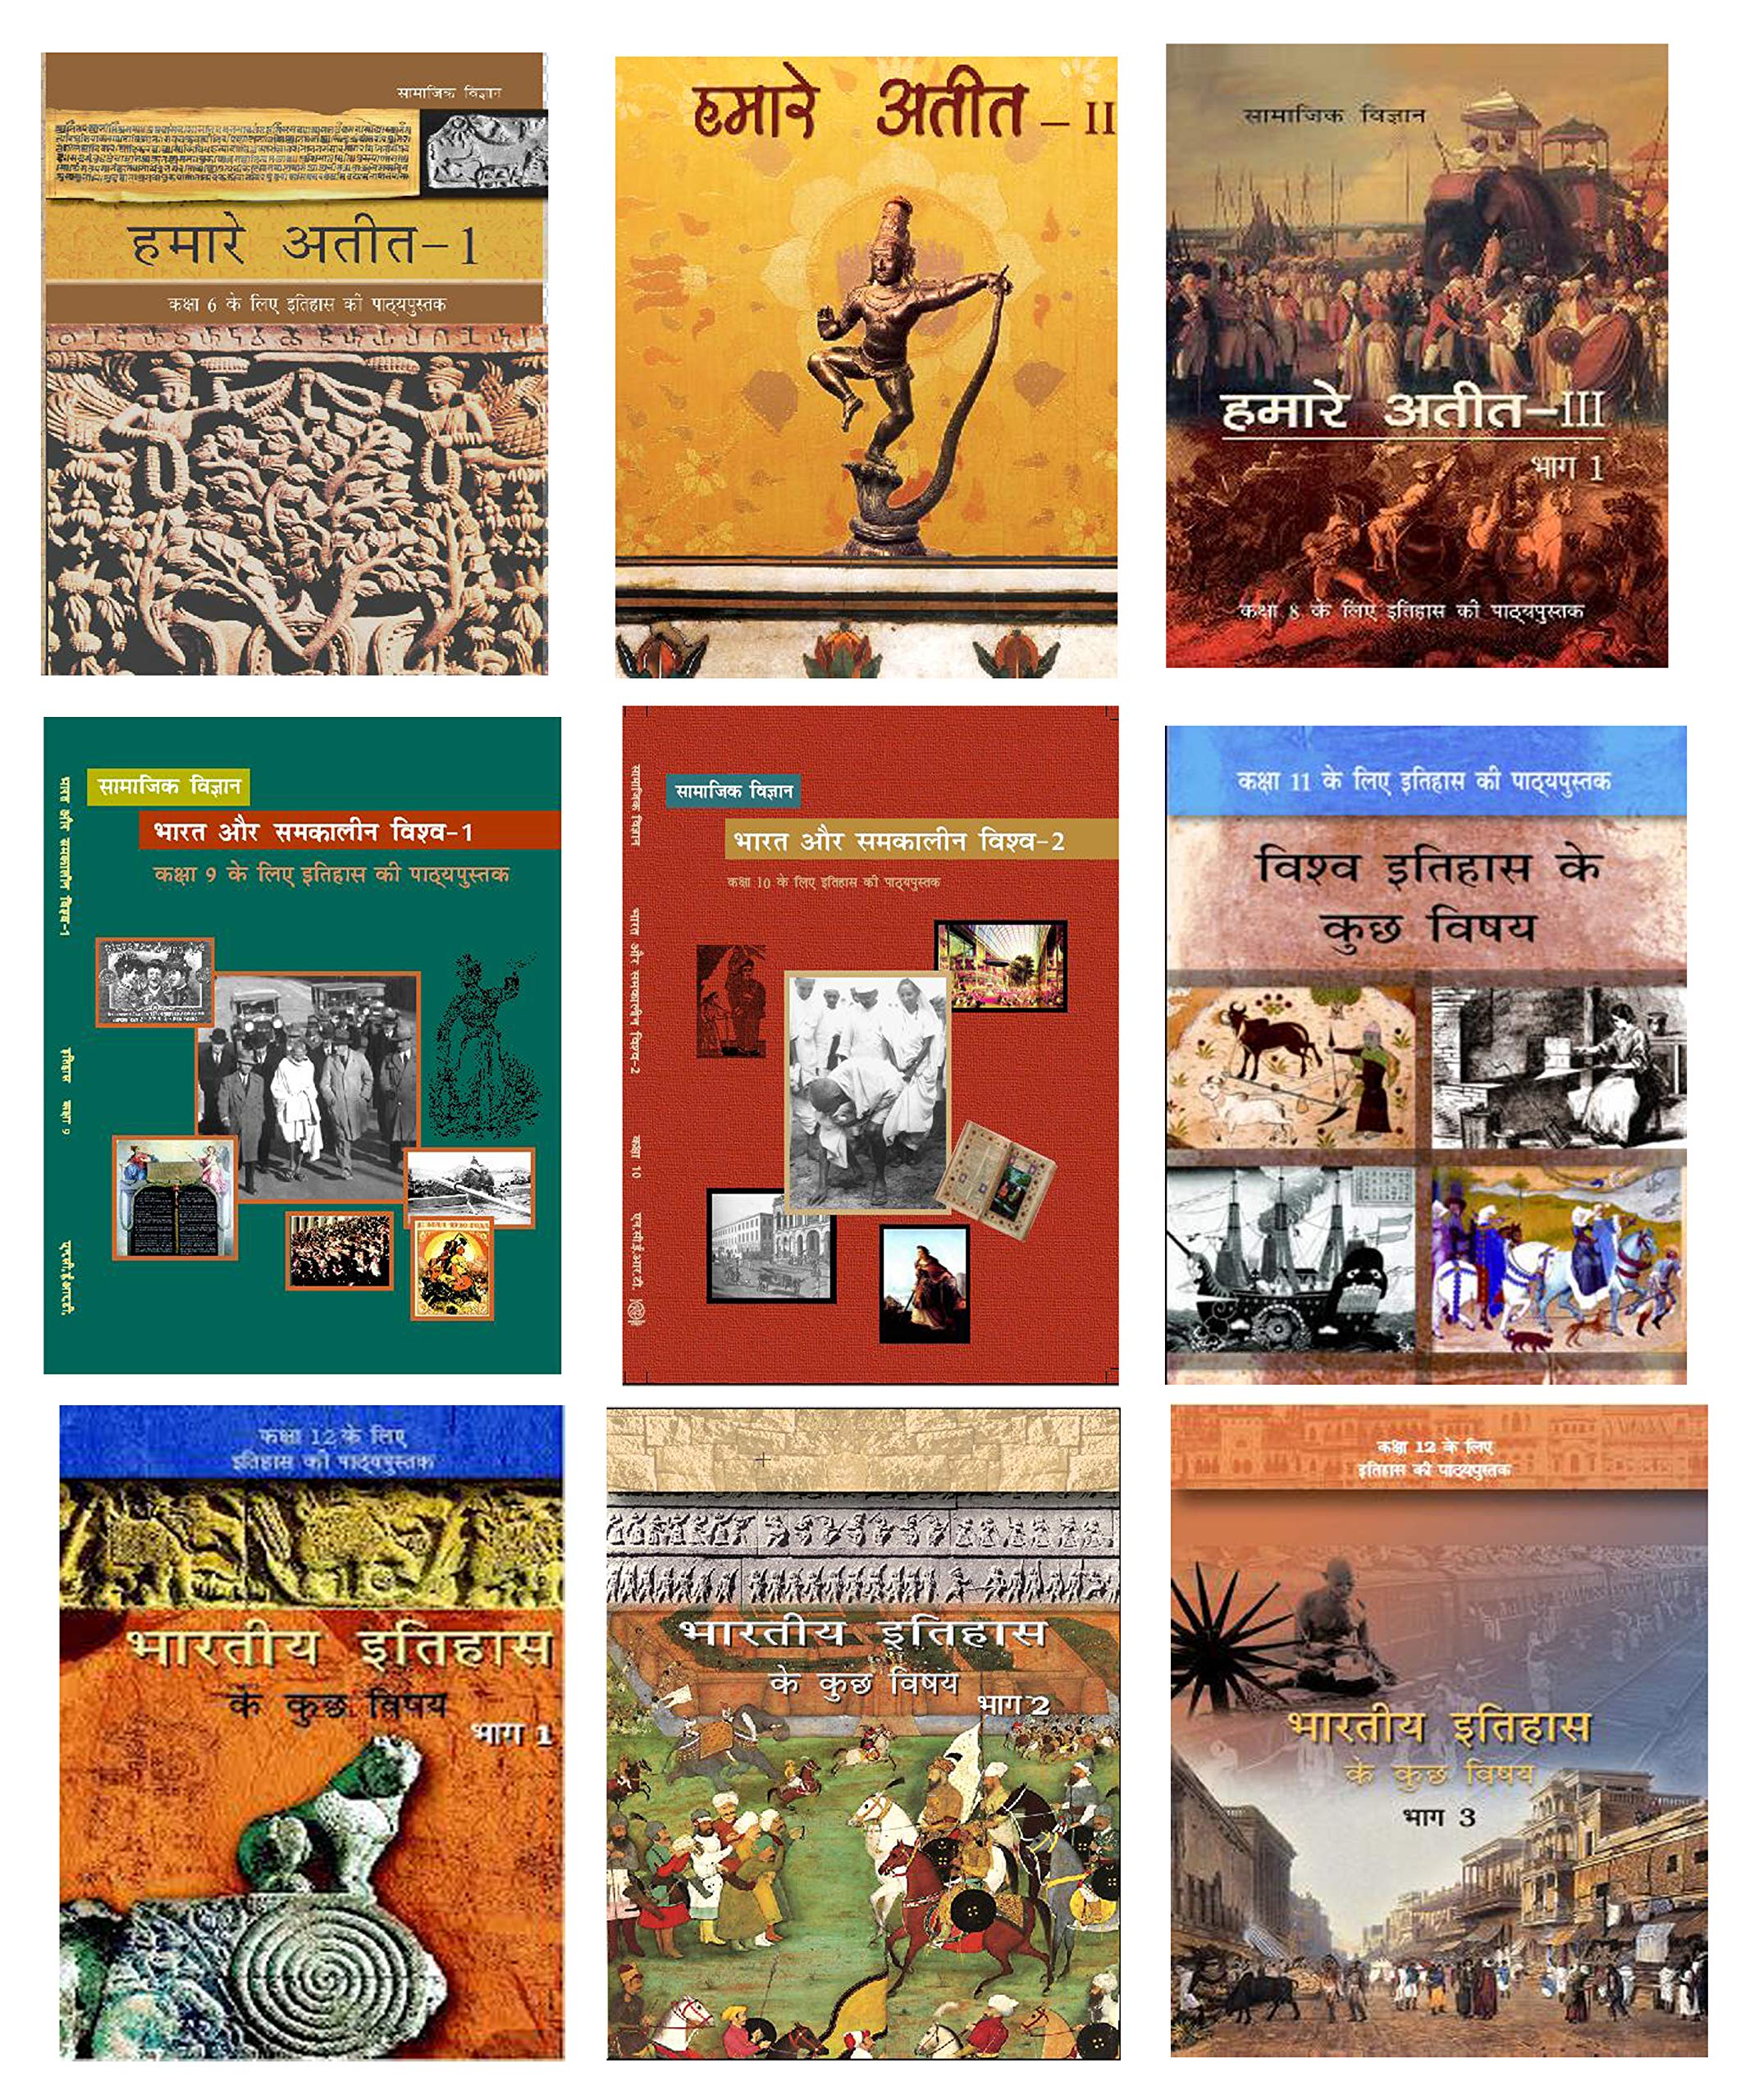 NCERT History Bookset Class 6 to 12 (Set of 9 Books) for UPSC Prelims ... - 91v0aqtiUcL